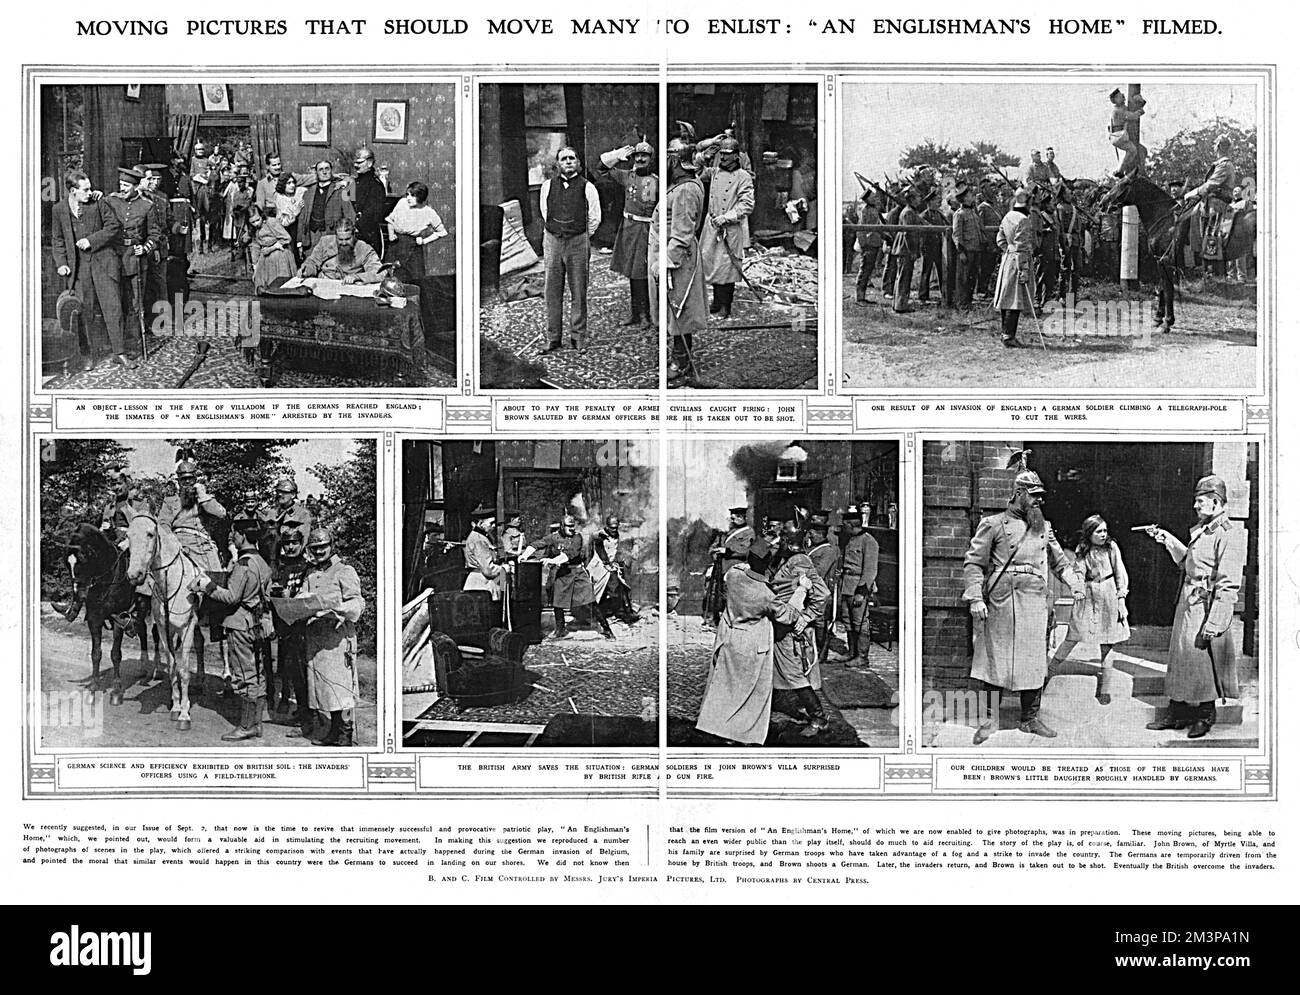 Scenes from the film version of the stage play, An Englishman's Home, produced by B and C Film in 1914.  Originally written by Guy du Maurier (who was killed in action in 1915), the play presciently predicted what might happen if there was an invasion of Britain. After the outbreak of the First World War, the play had enhanced significance and was adapted for cinema. Stock Photo